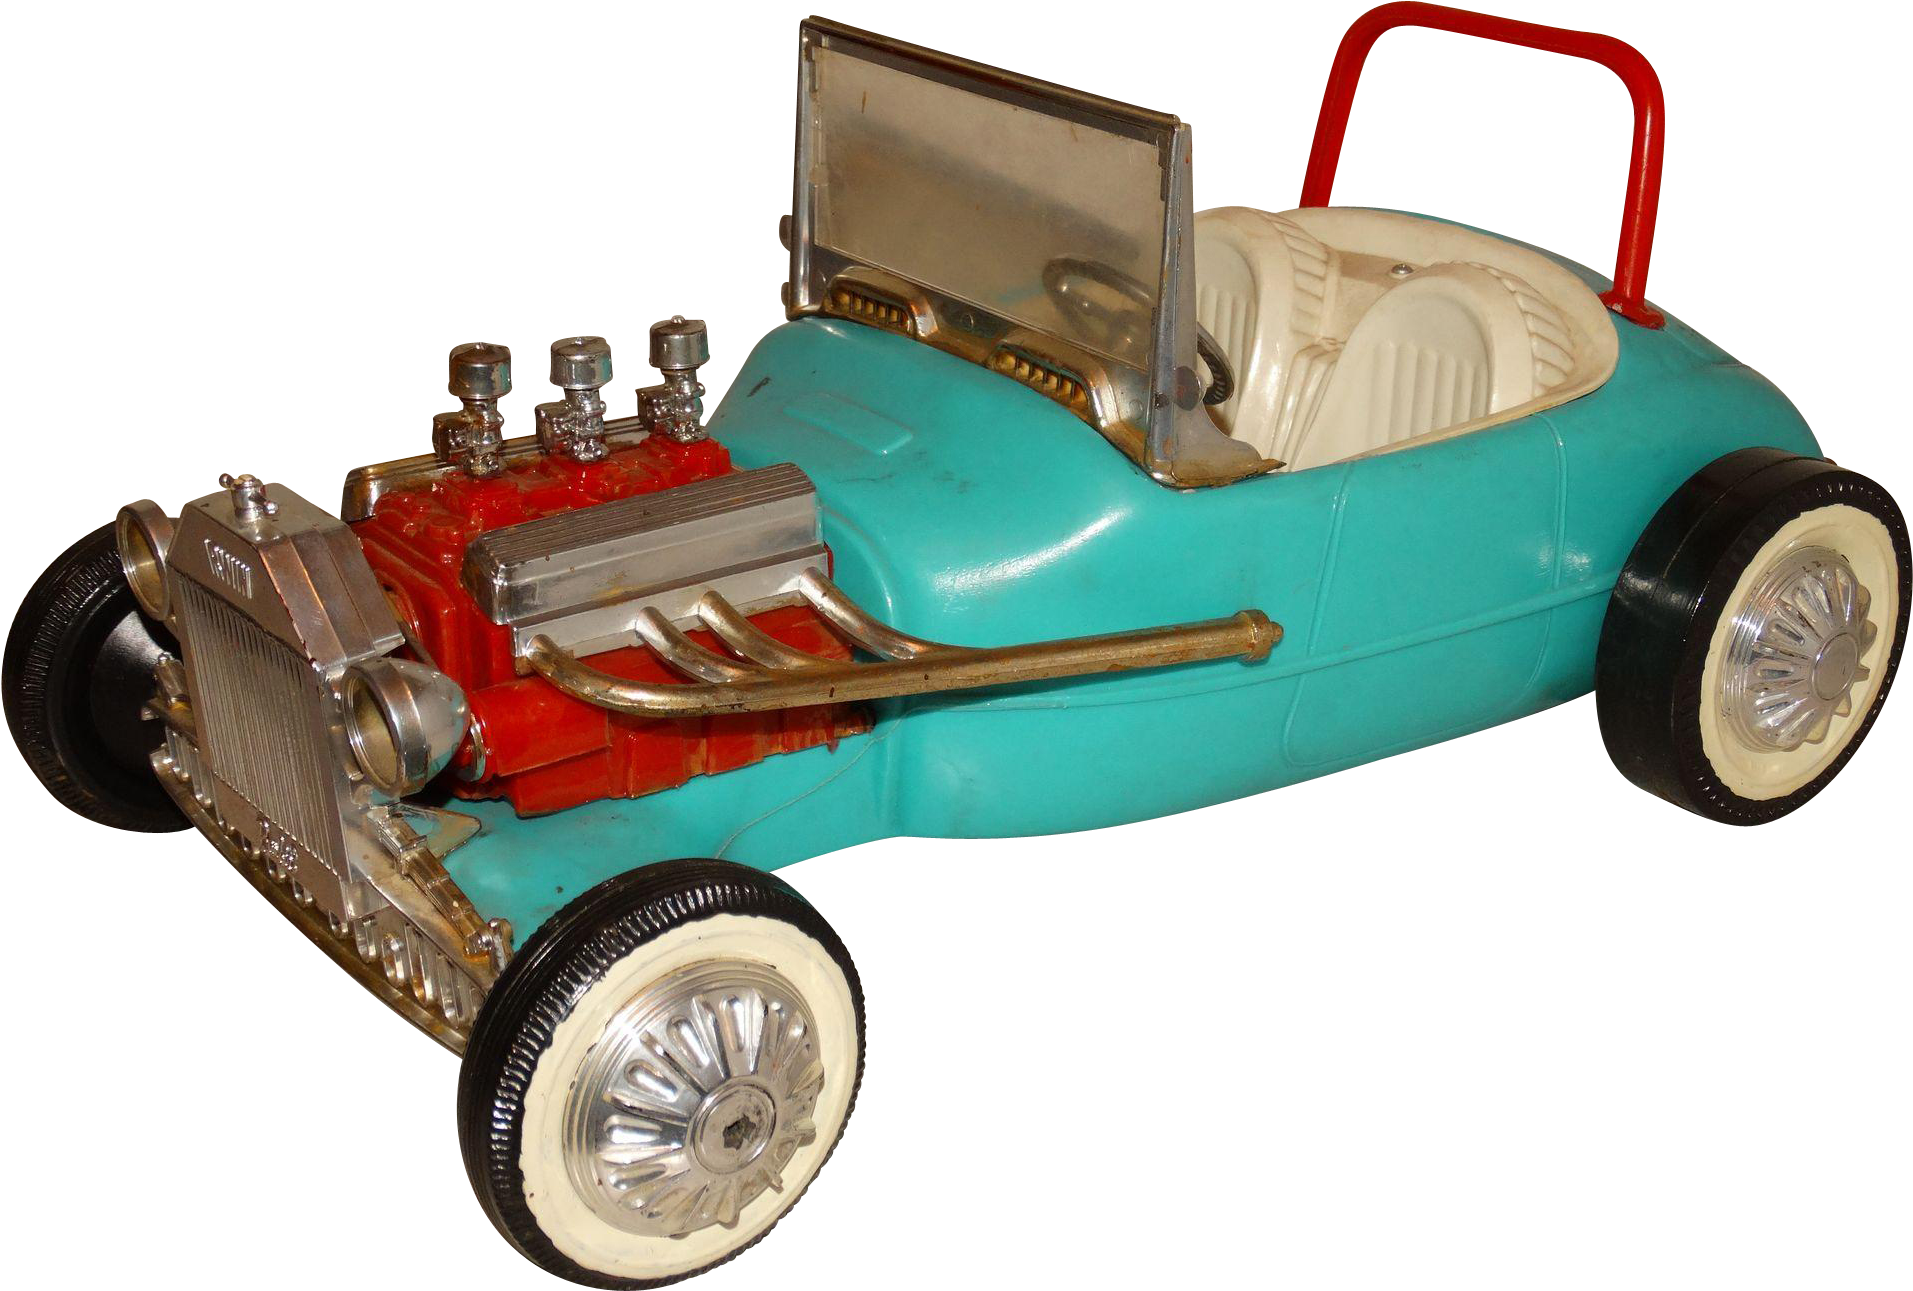 A Toy Car With A Red And Blue Engine